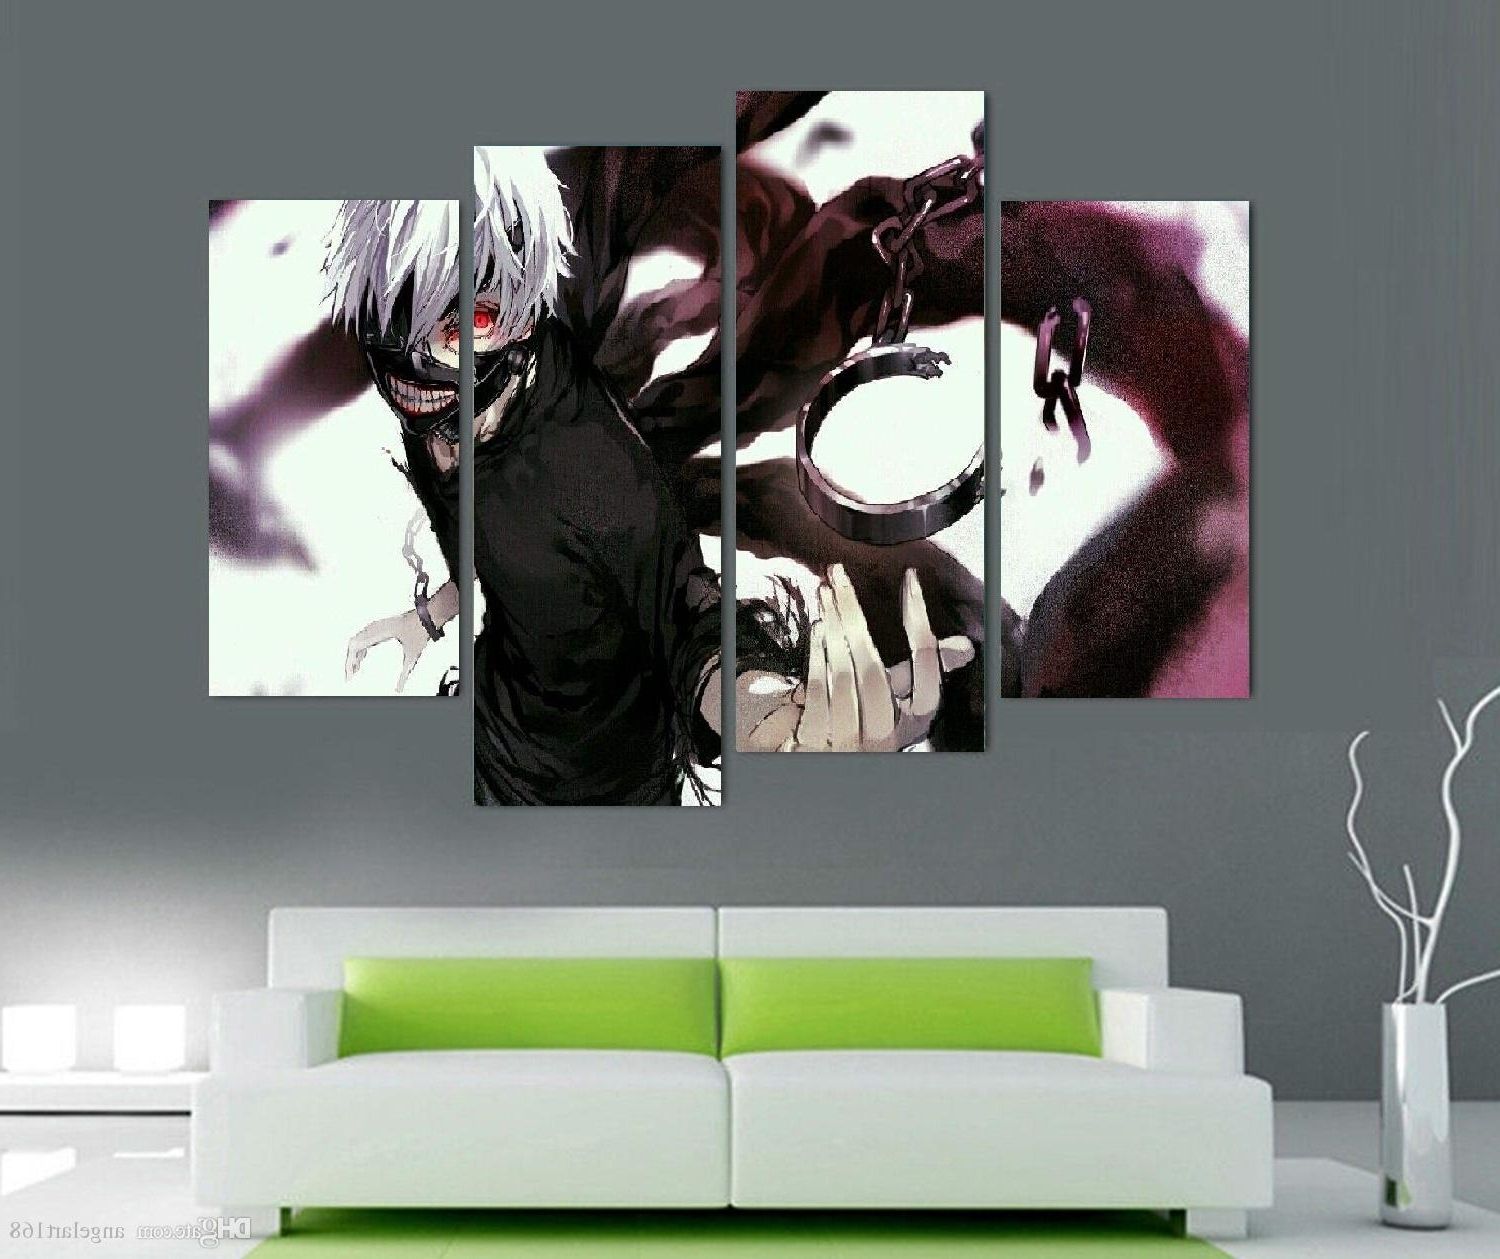 2018 Unframed Tokyo Ghoul Anime Painting Broken Chain On Canvas Intended For Most Up To Date Anime Canvas Wall Art (View 14 of 15)